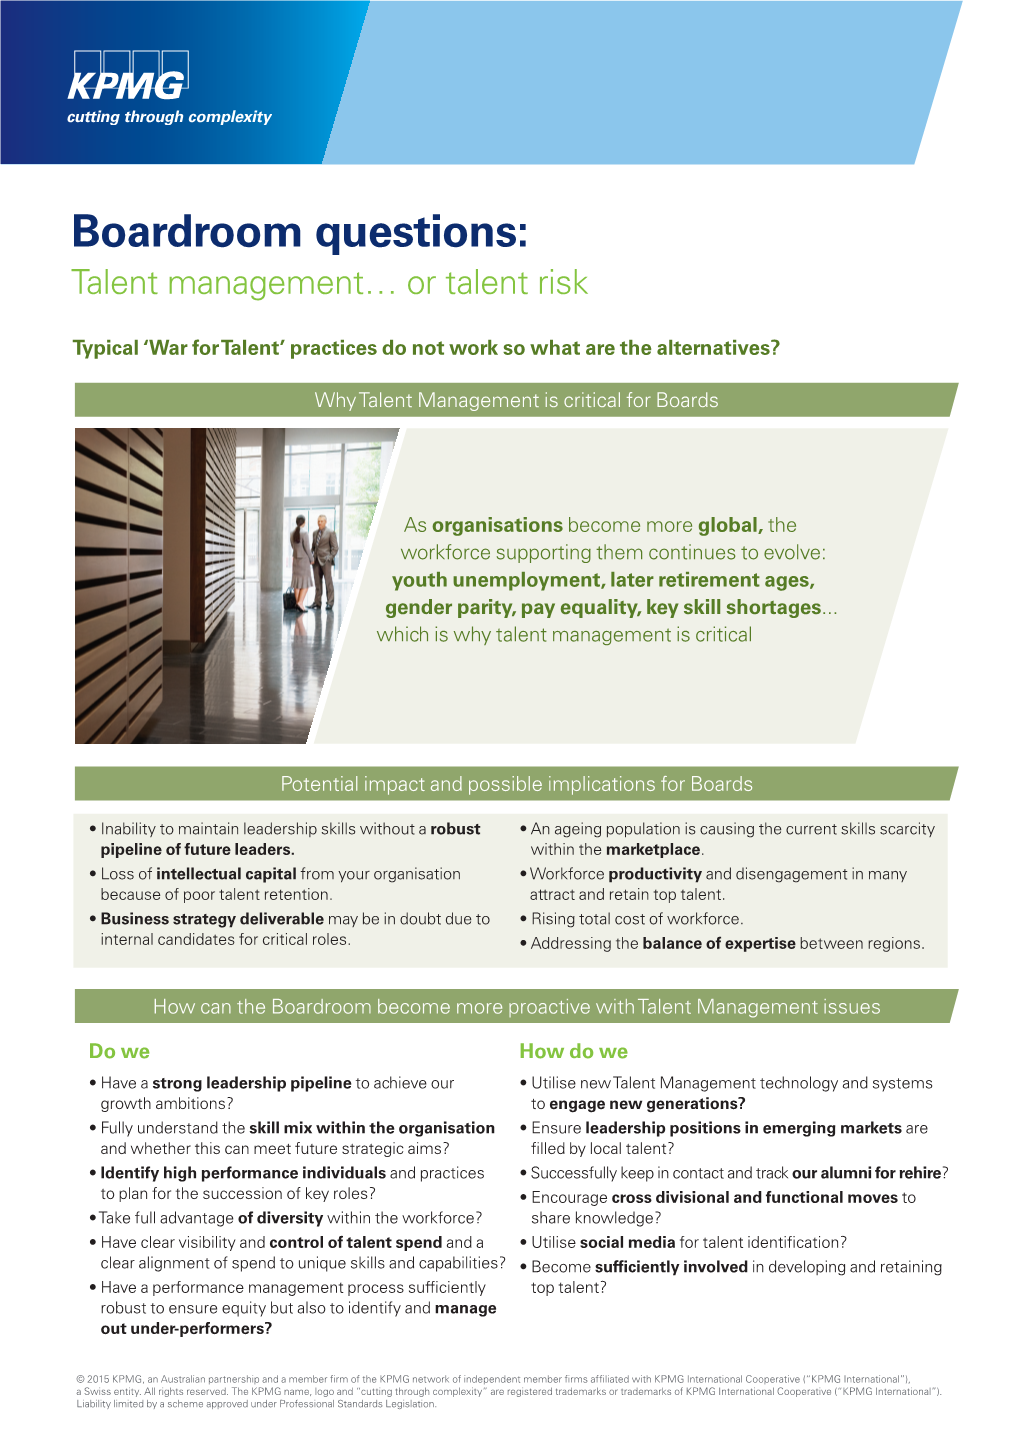 Boardroom Questions: Talent Management… Or Talent Risk